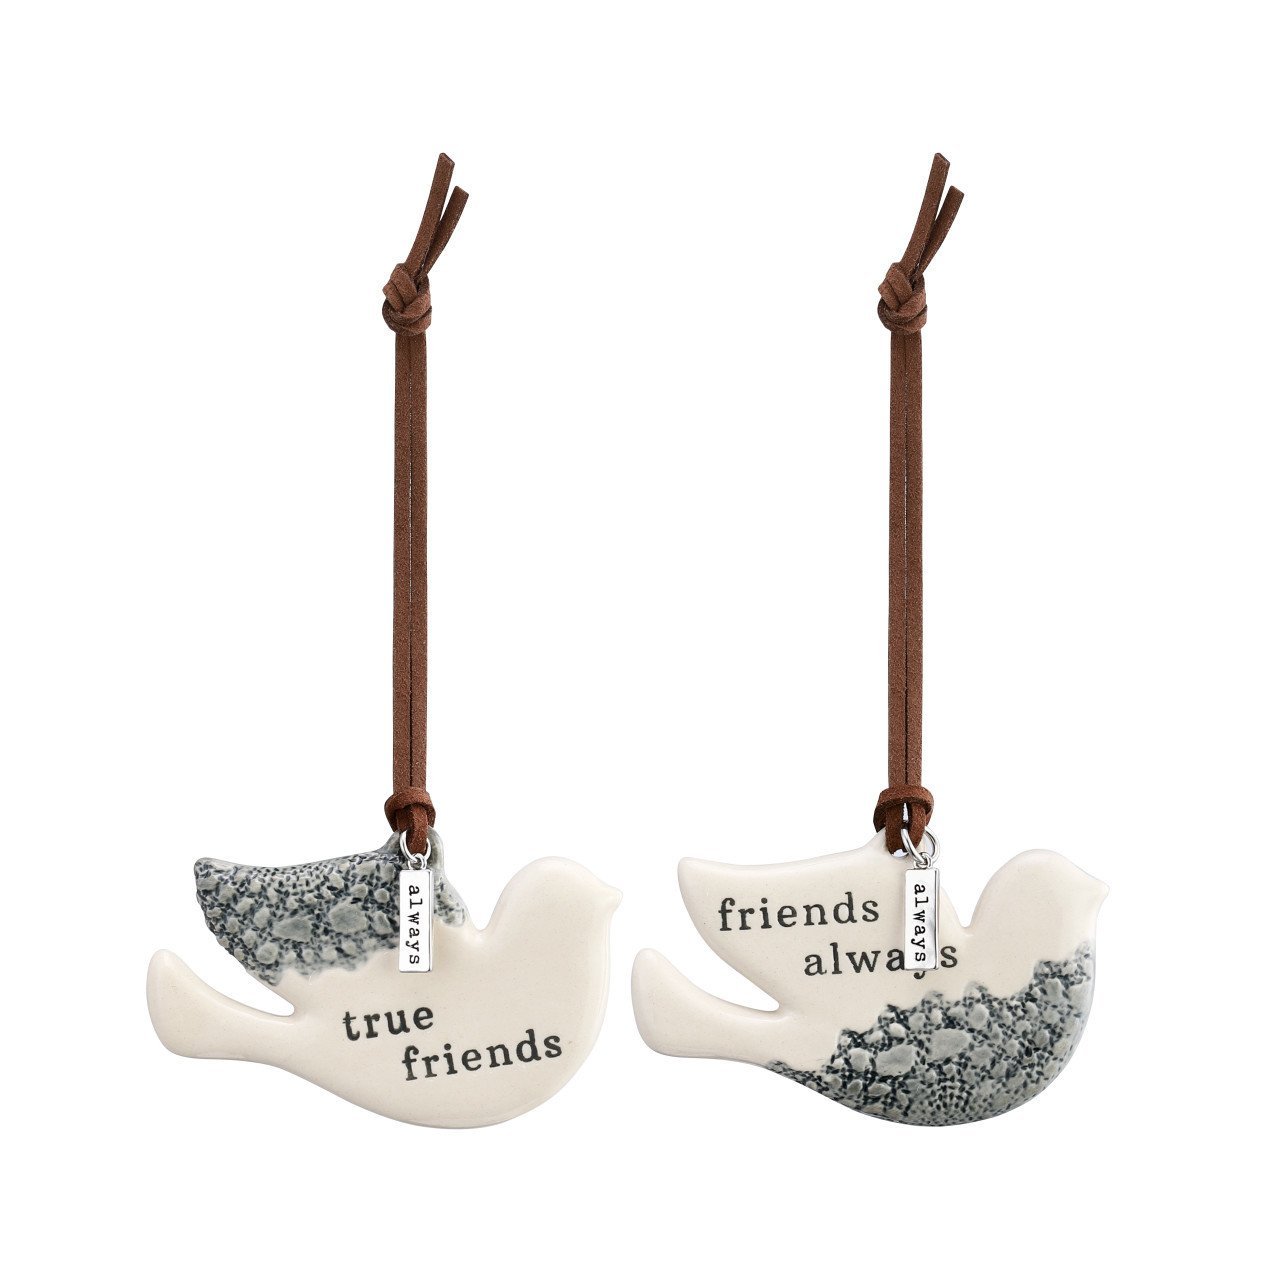 FRIENDS ONE TO KEEP, ONE TO SHARE ORNAMENT SET - 1004500097 - Molly's! A Chic and Unique Boutique 